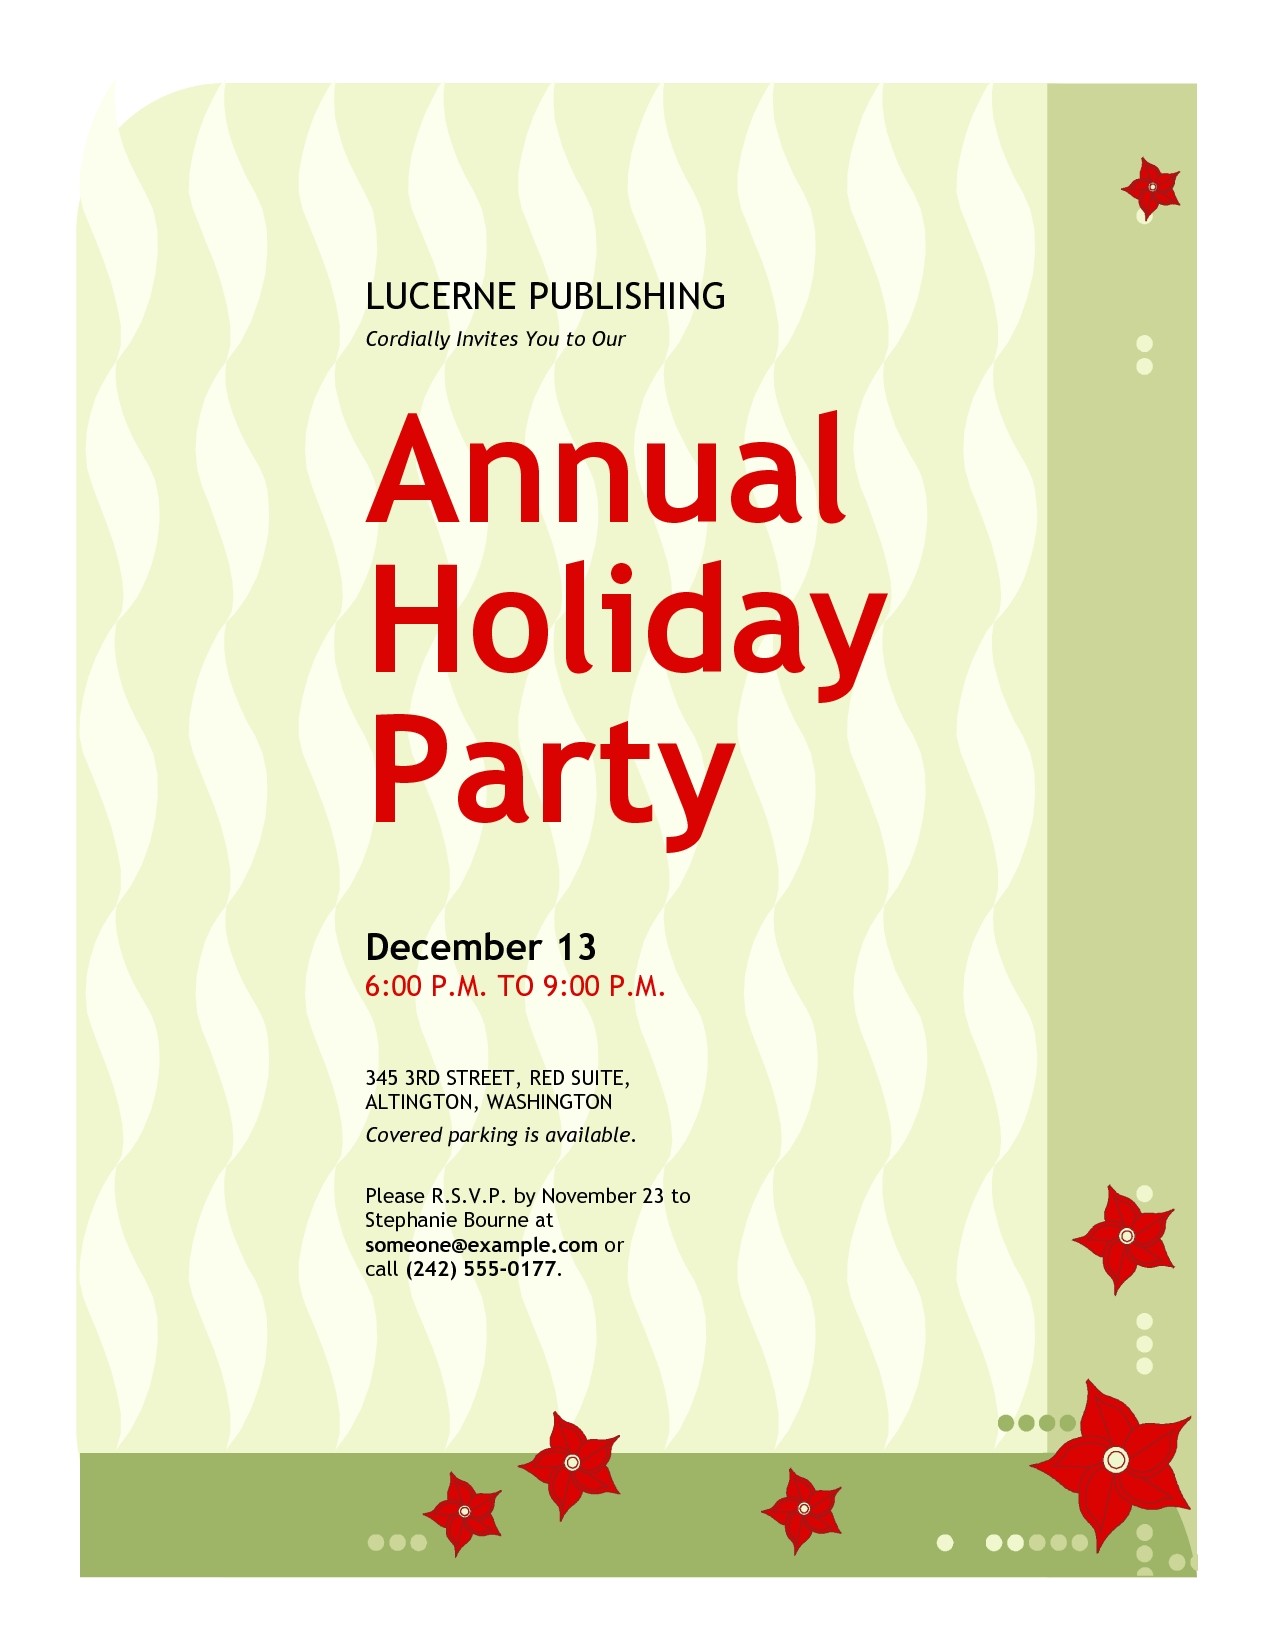 Employee Holiday Party Invitations Wording Employee Christmas Party Invitation Wording Cobypic Com